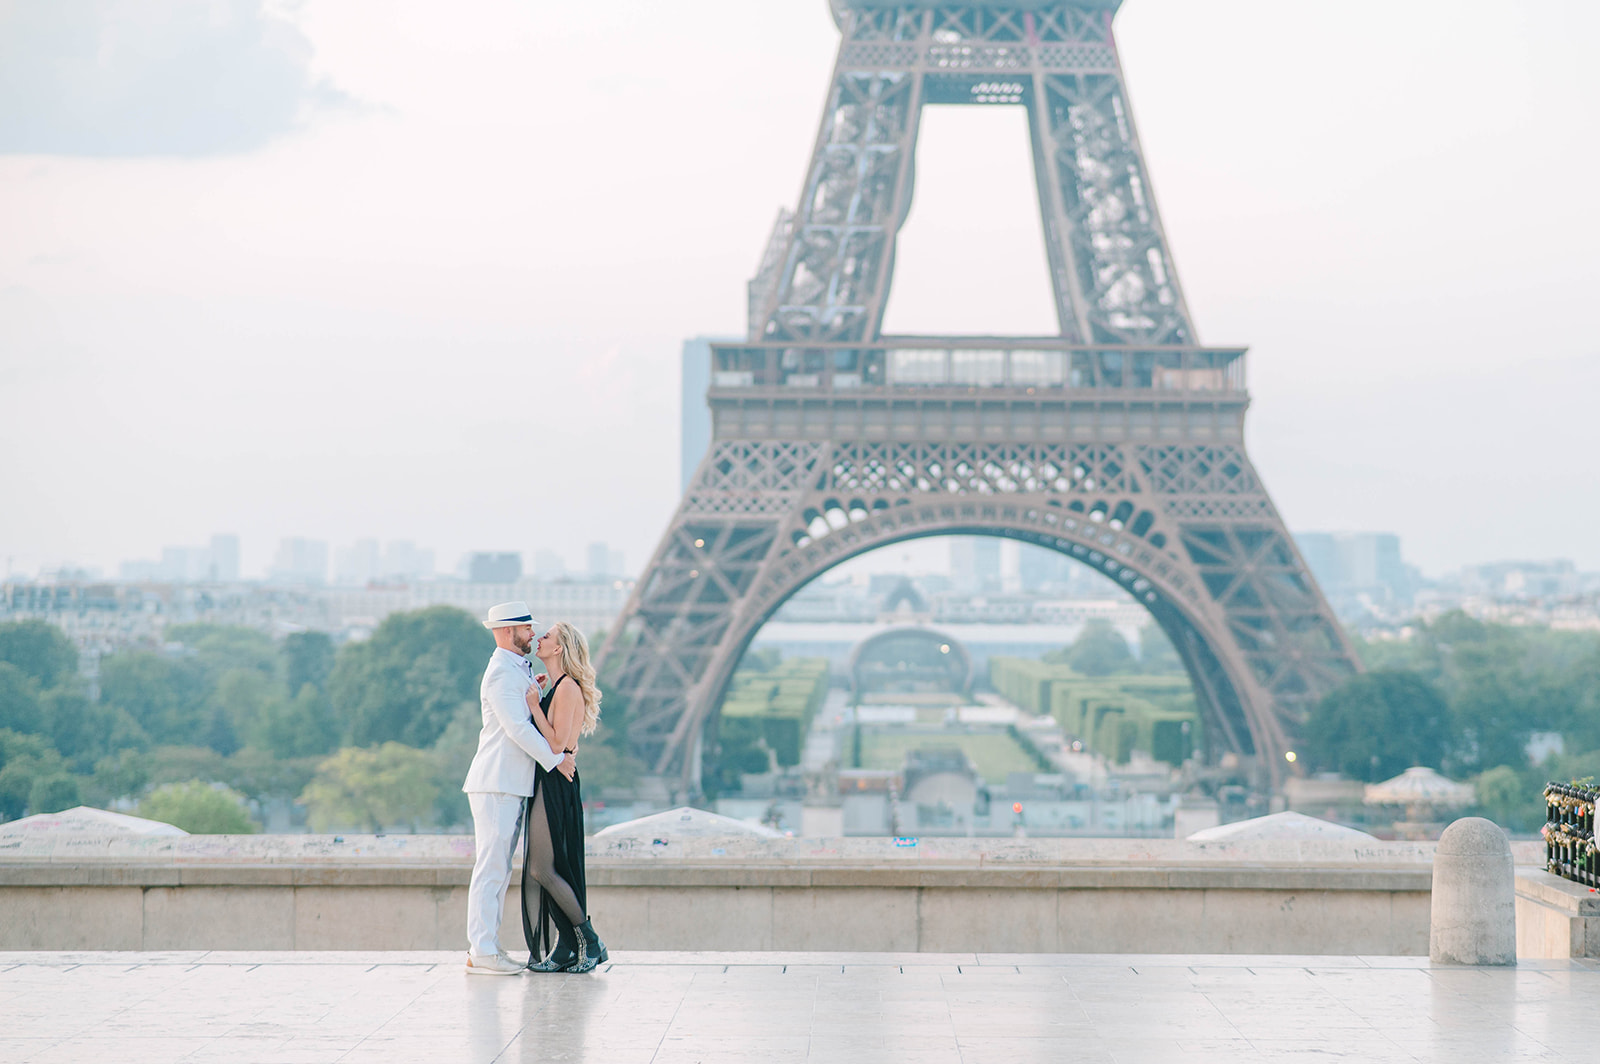 Couple hugging in front of the Eiffel Tower